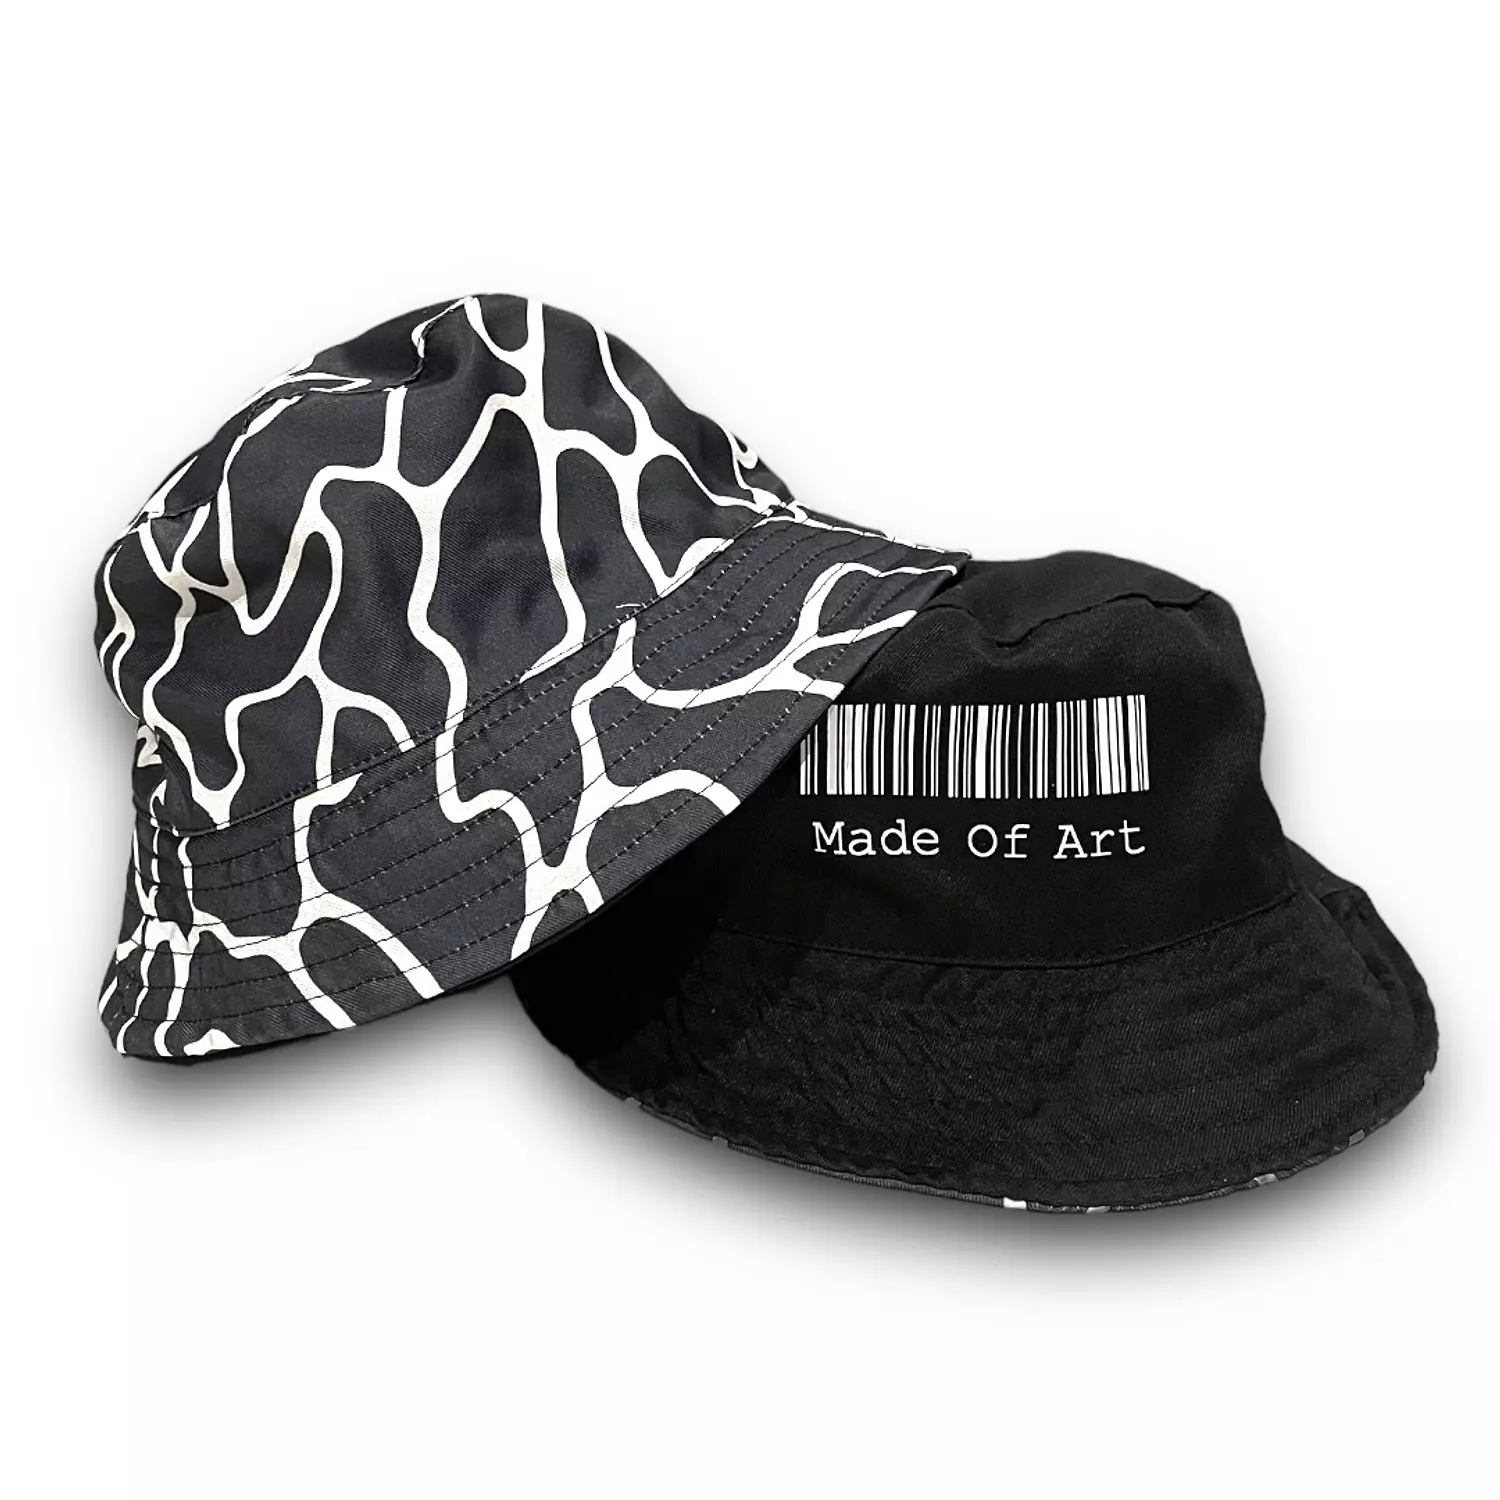 Made Of Art Bucket Hat hover image